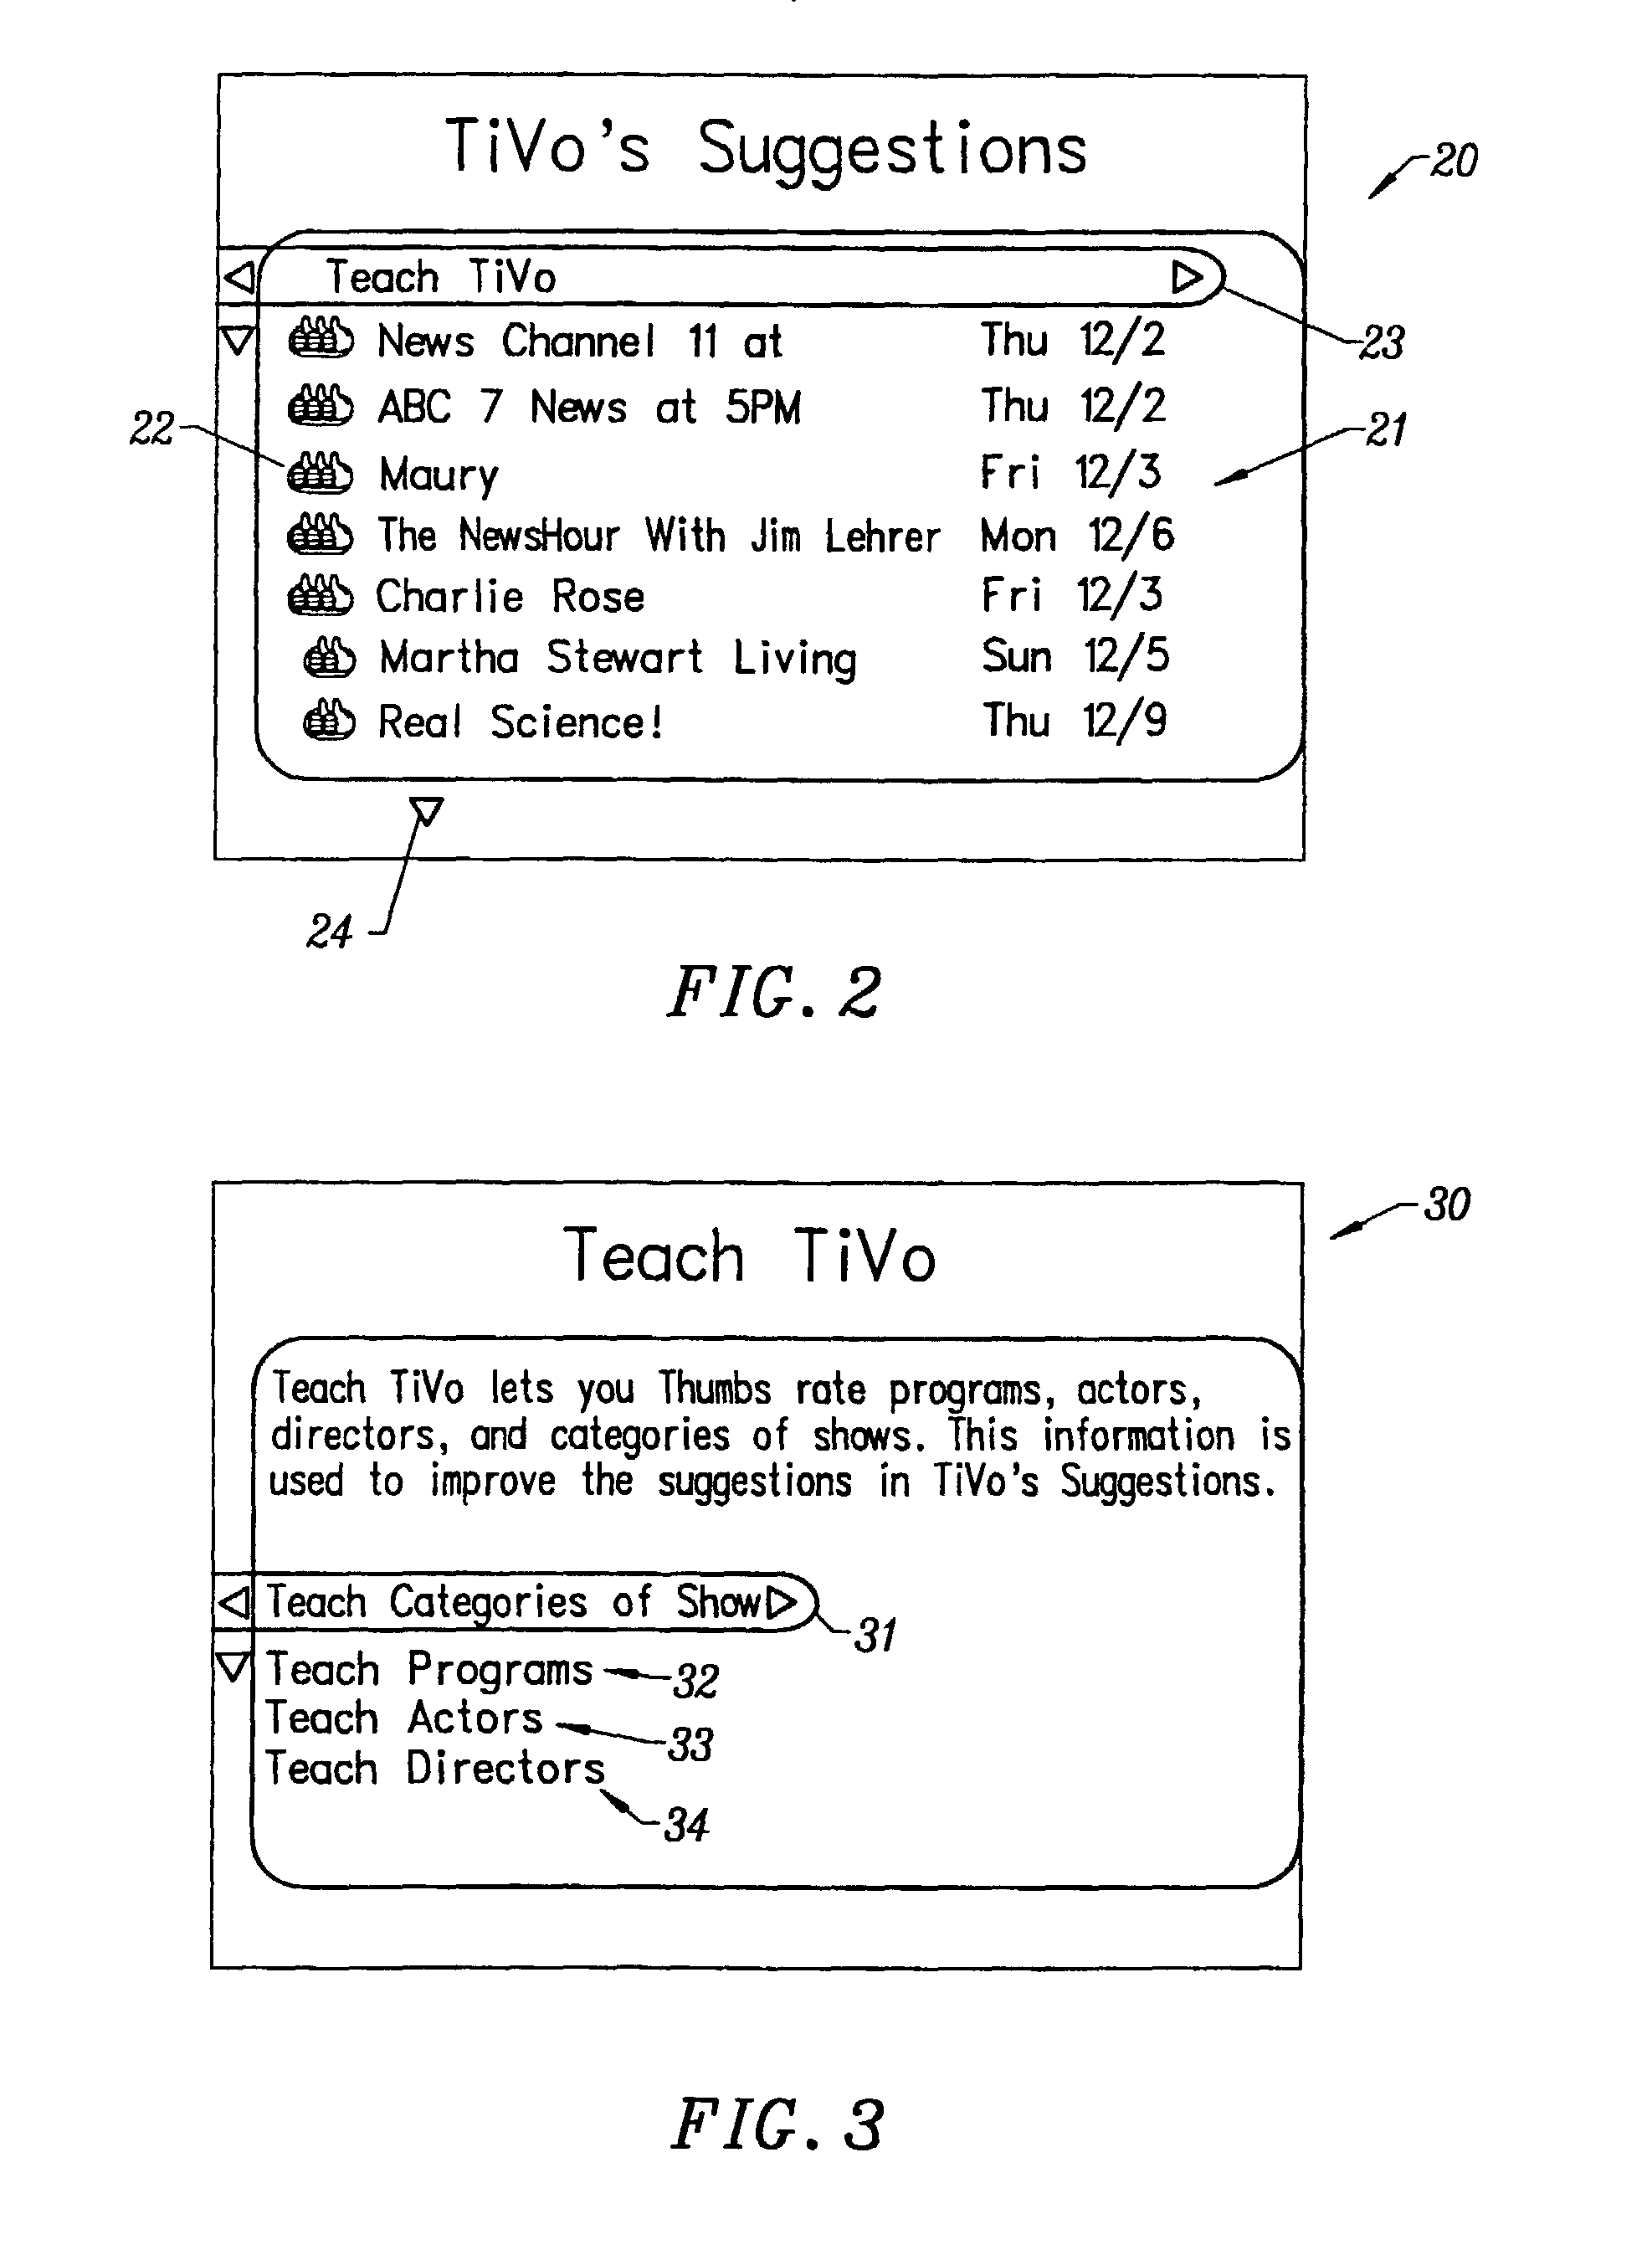 Intelligent system and methods of recommending media content items based on user preferences